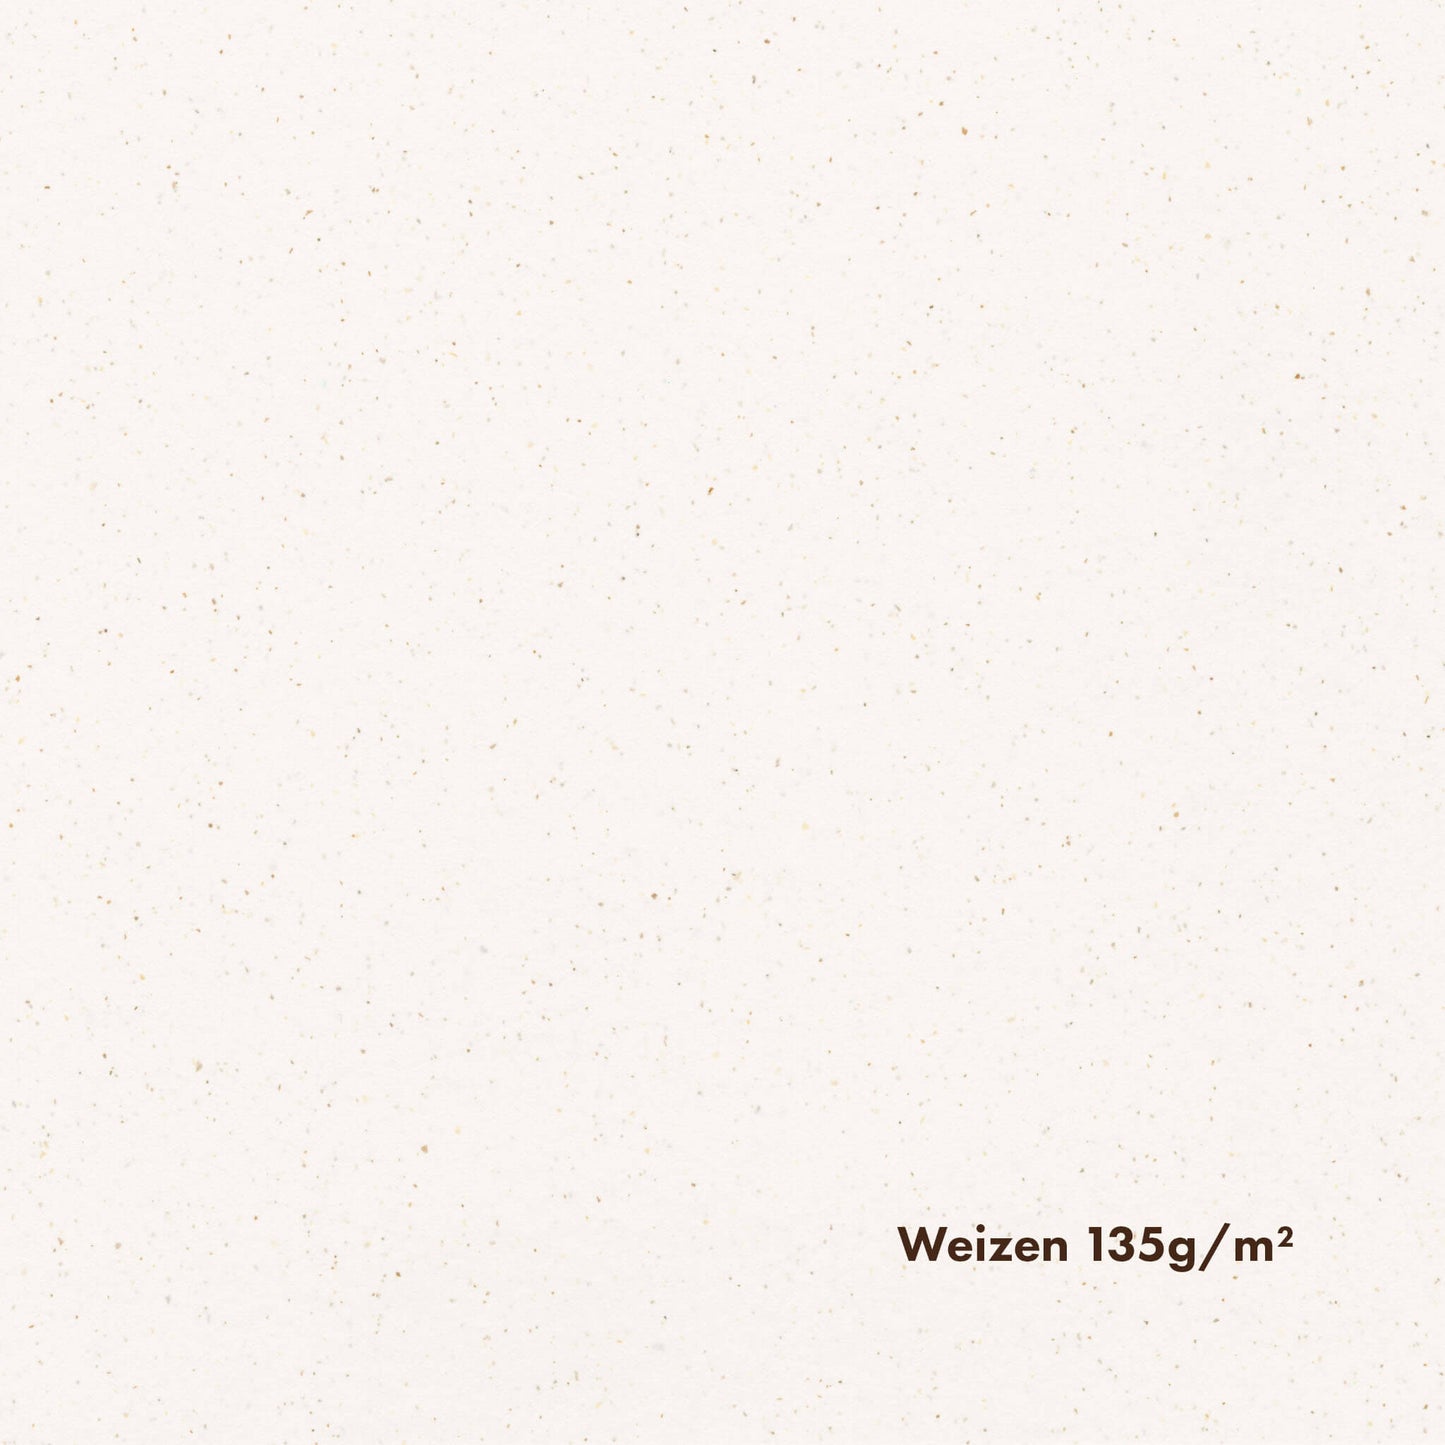 Close-up of white-toned pulp paper with noticeable brown speckles, with the text 'Weizen 135g/m2' printed on it.